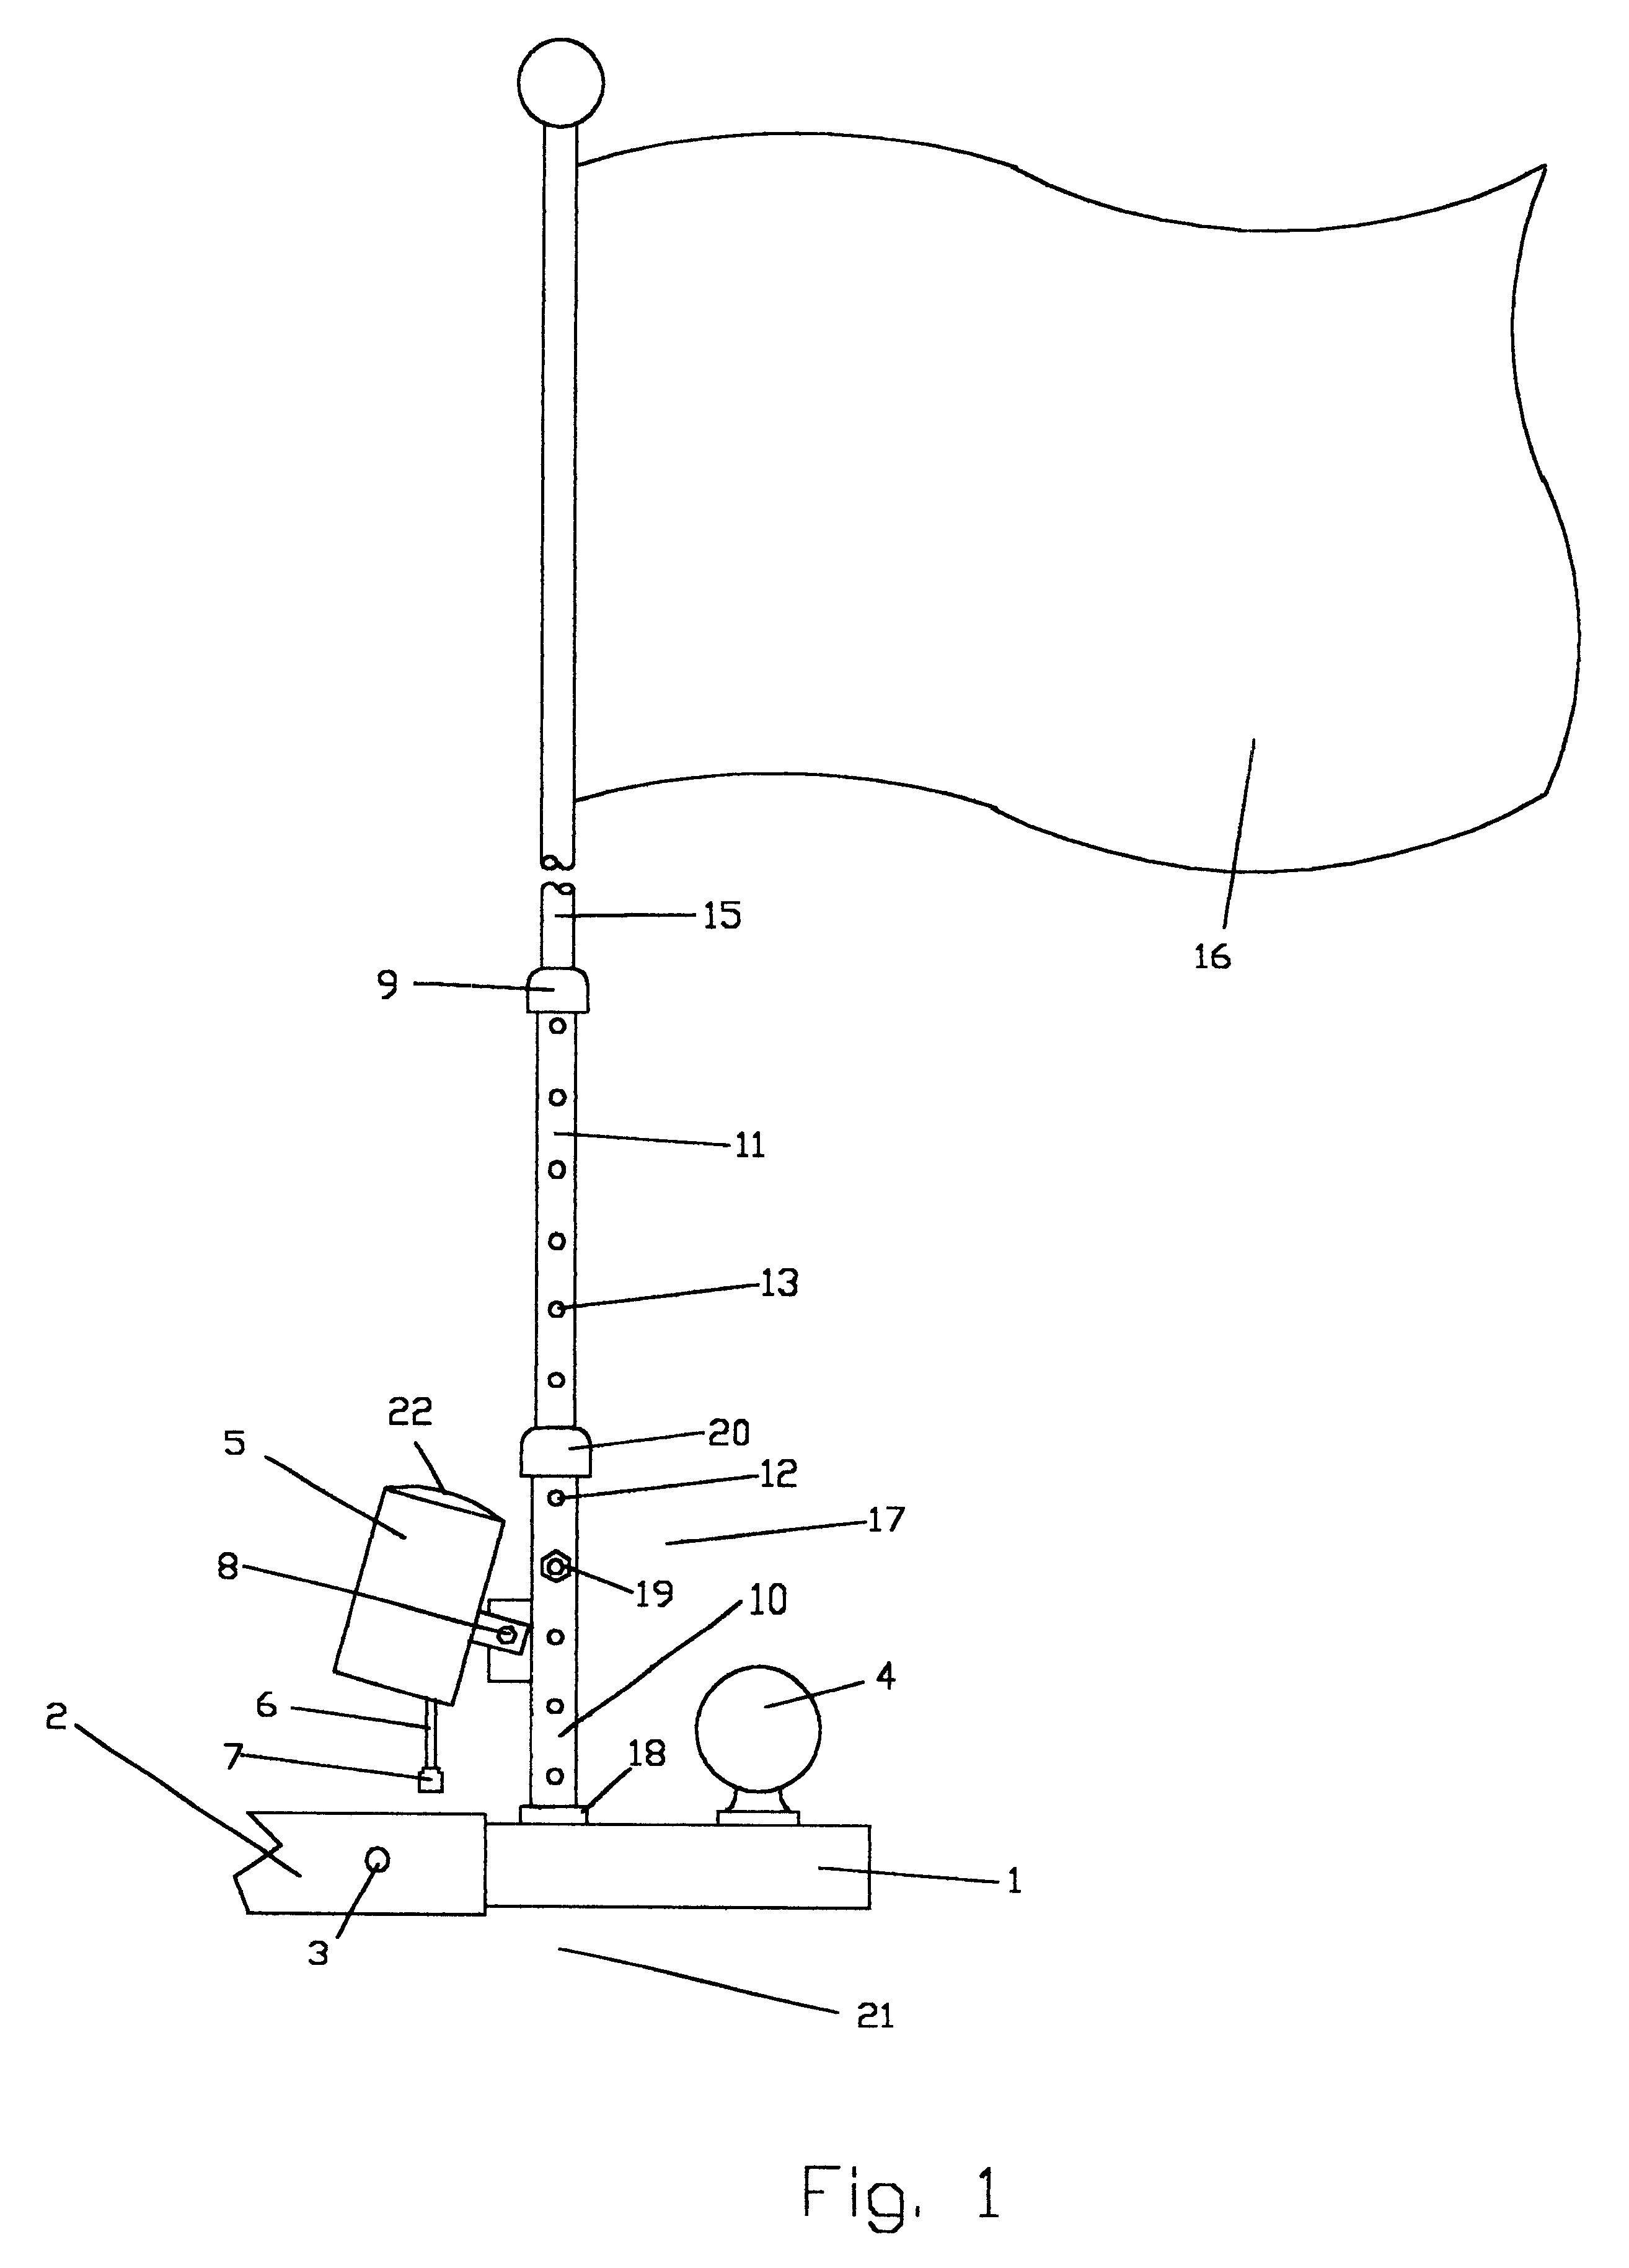 Combination flagstaff holder and ball hitch